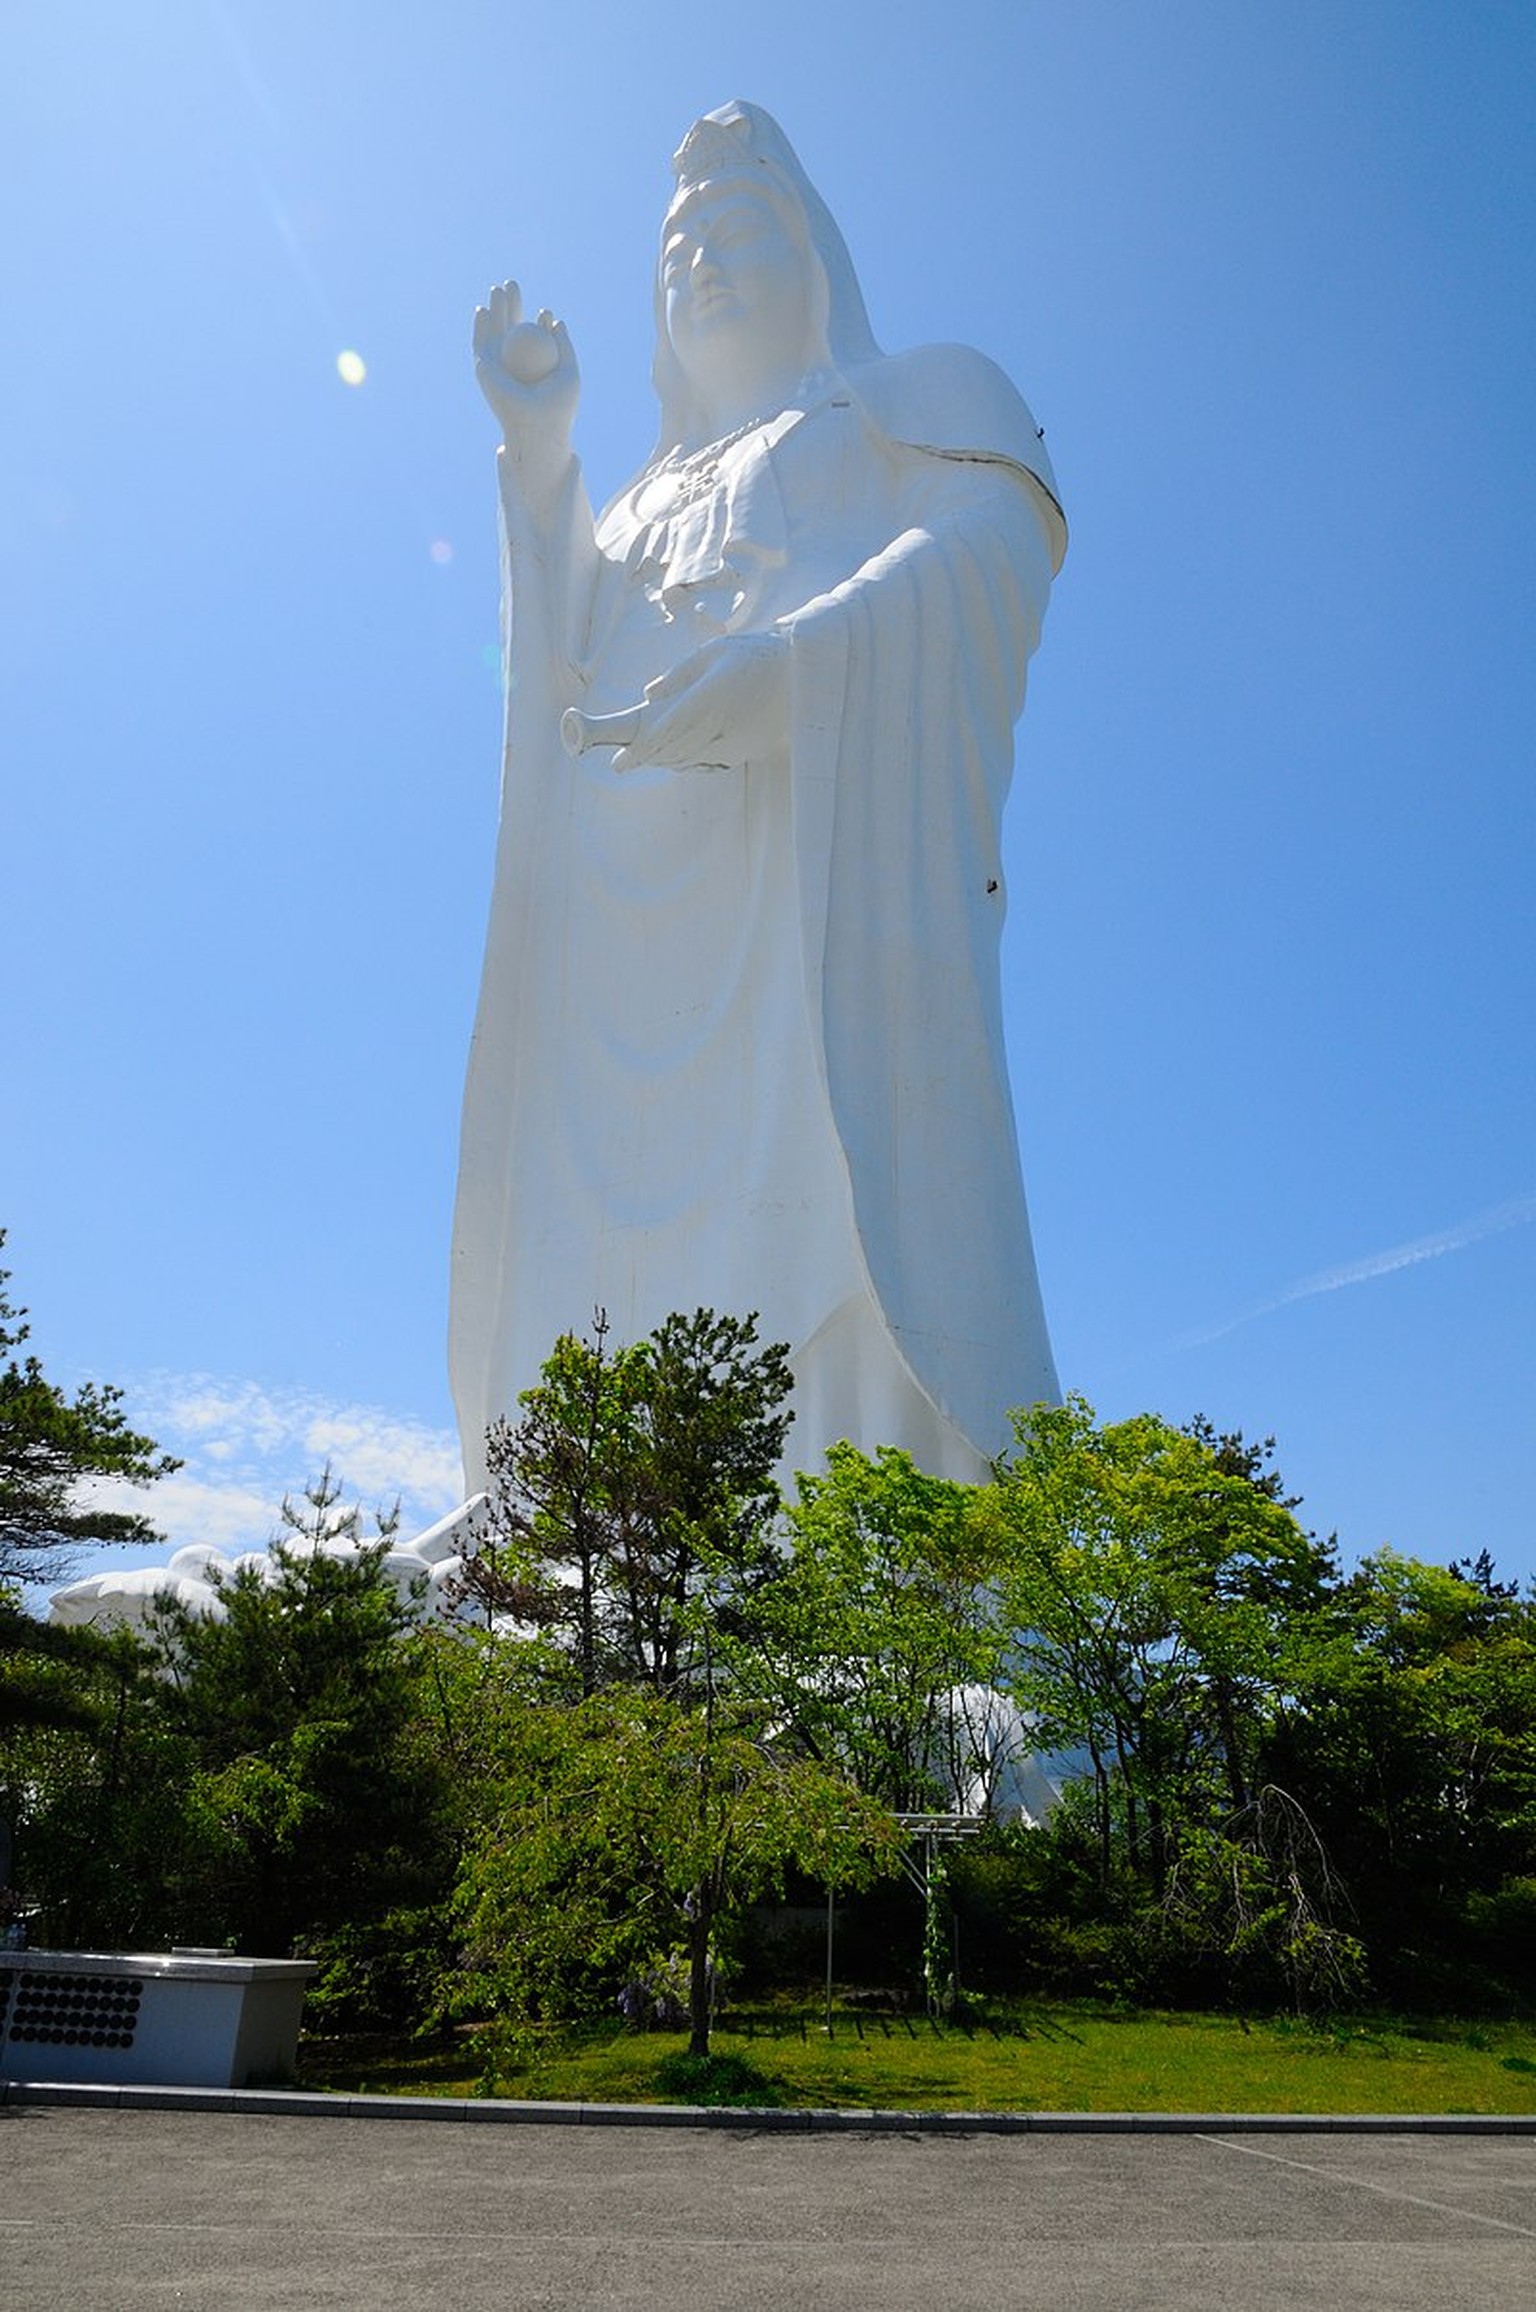 Sendai Daikannon (仙台 大観音) is a large statue of the gem-bearing Nyoirin Kannon (如意輪 観音) form of Kannon (観音), located in Sendai, Japan.

It is the tallest statue of Nyoirin Kannon in the world, and the  ...